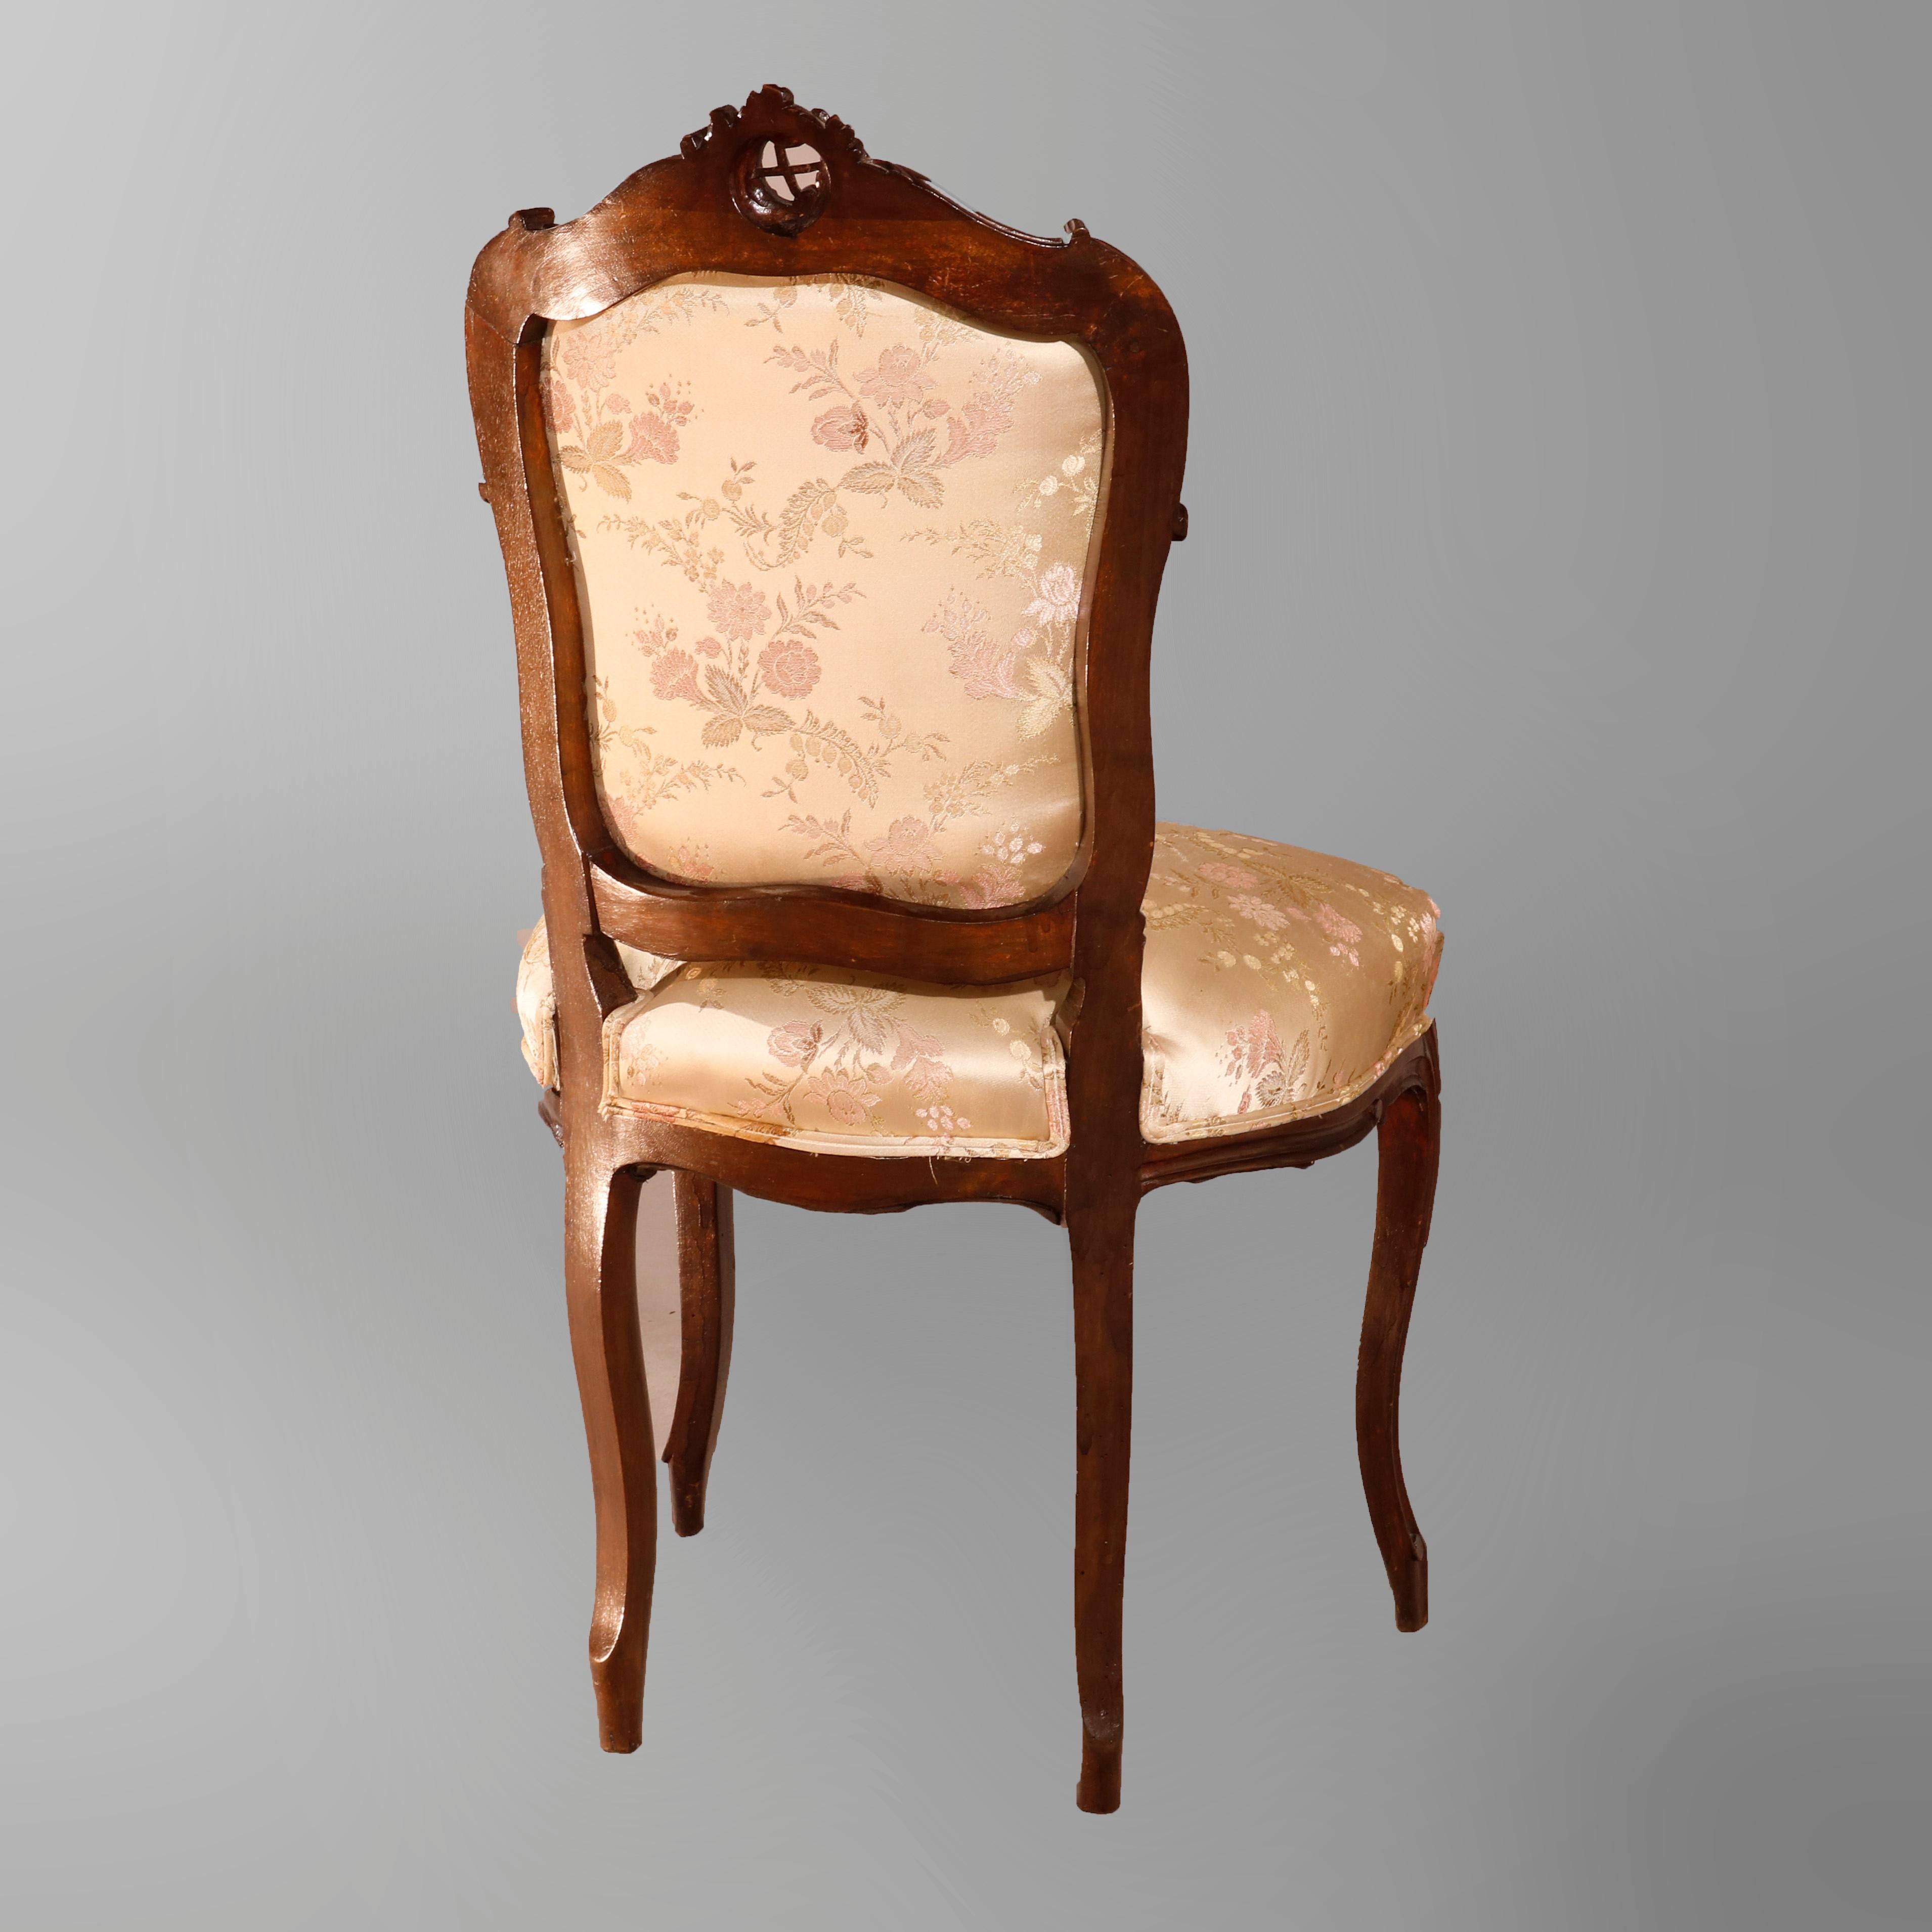 Upholstery Pair of French Louis XV Style Carved Walnut Parlor Side Chairs, circa 1890